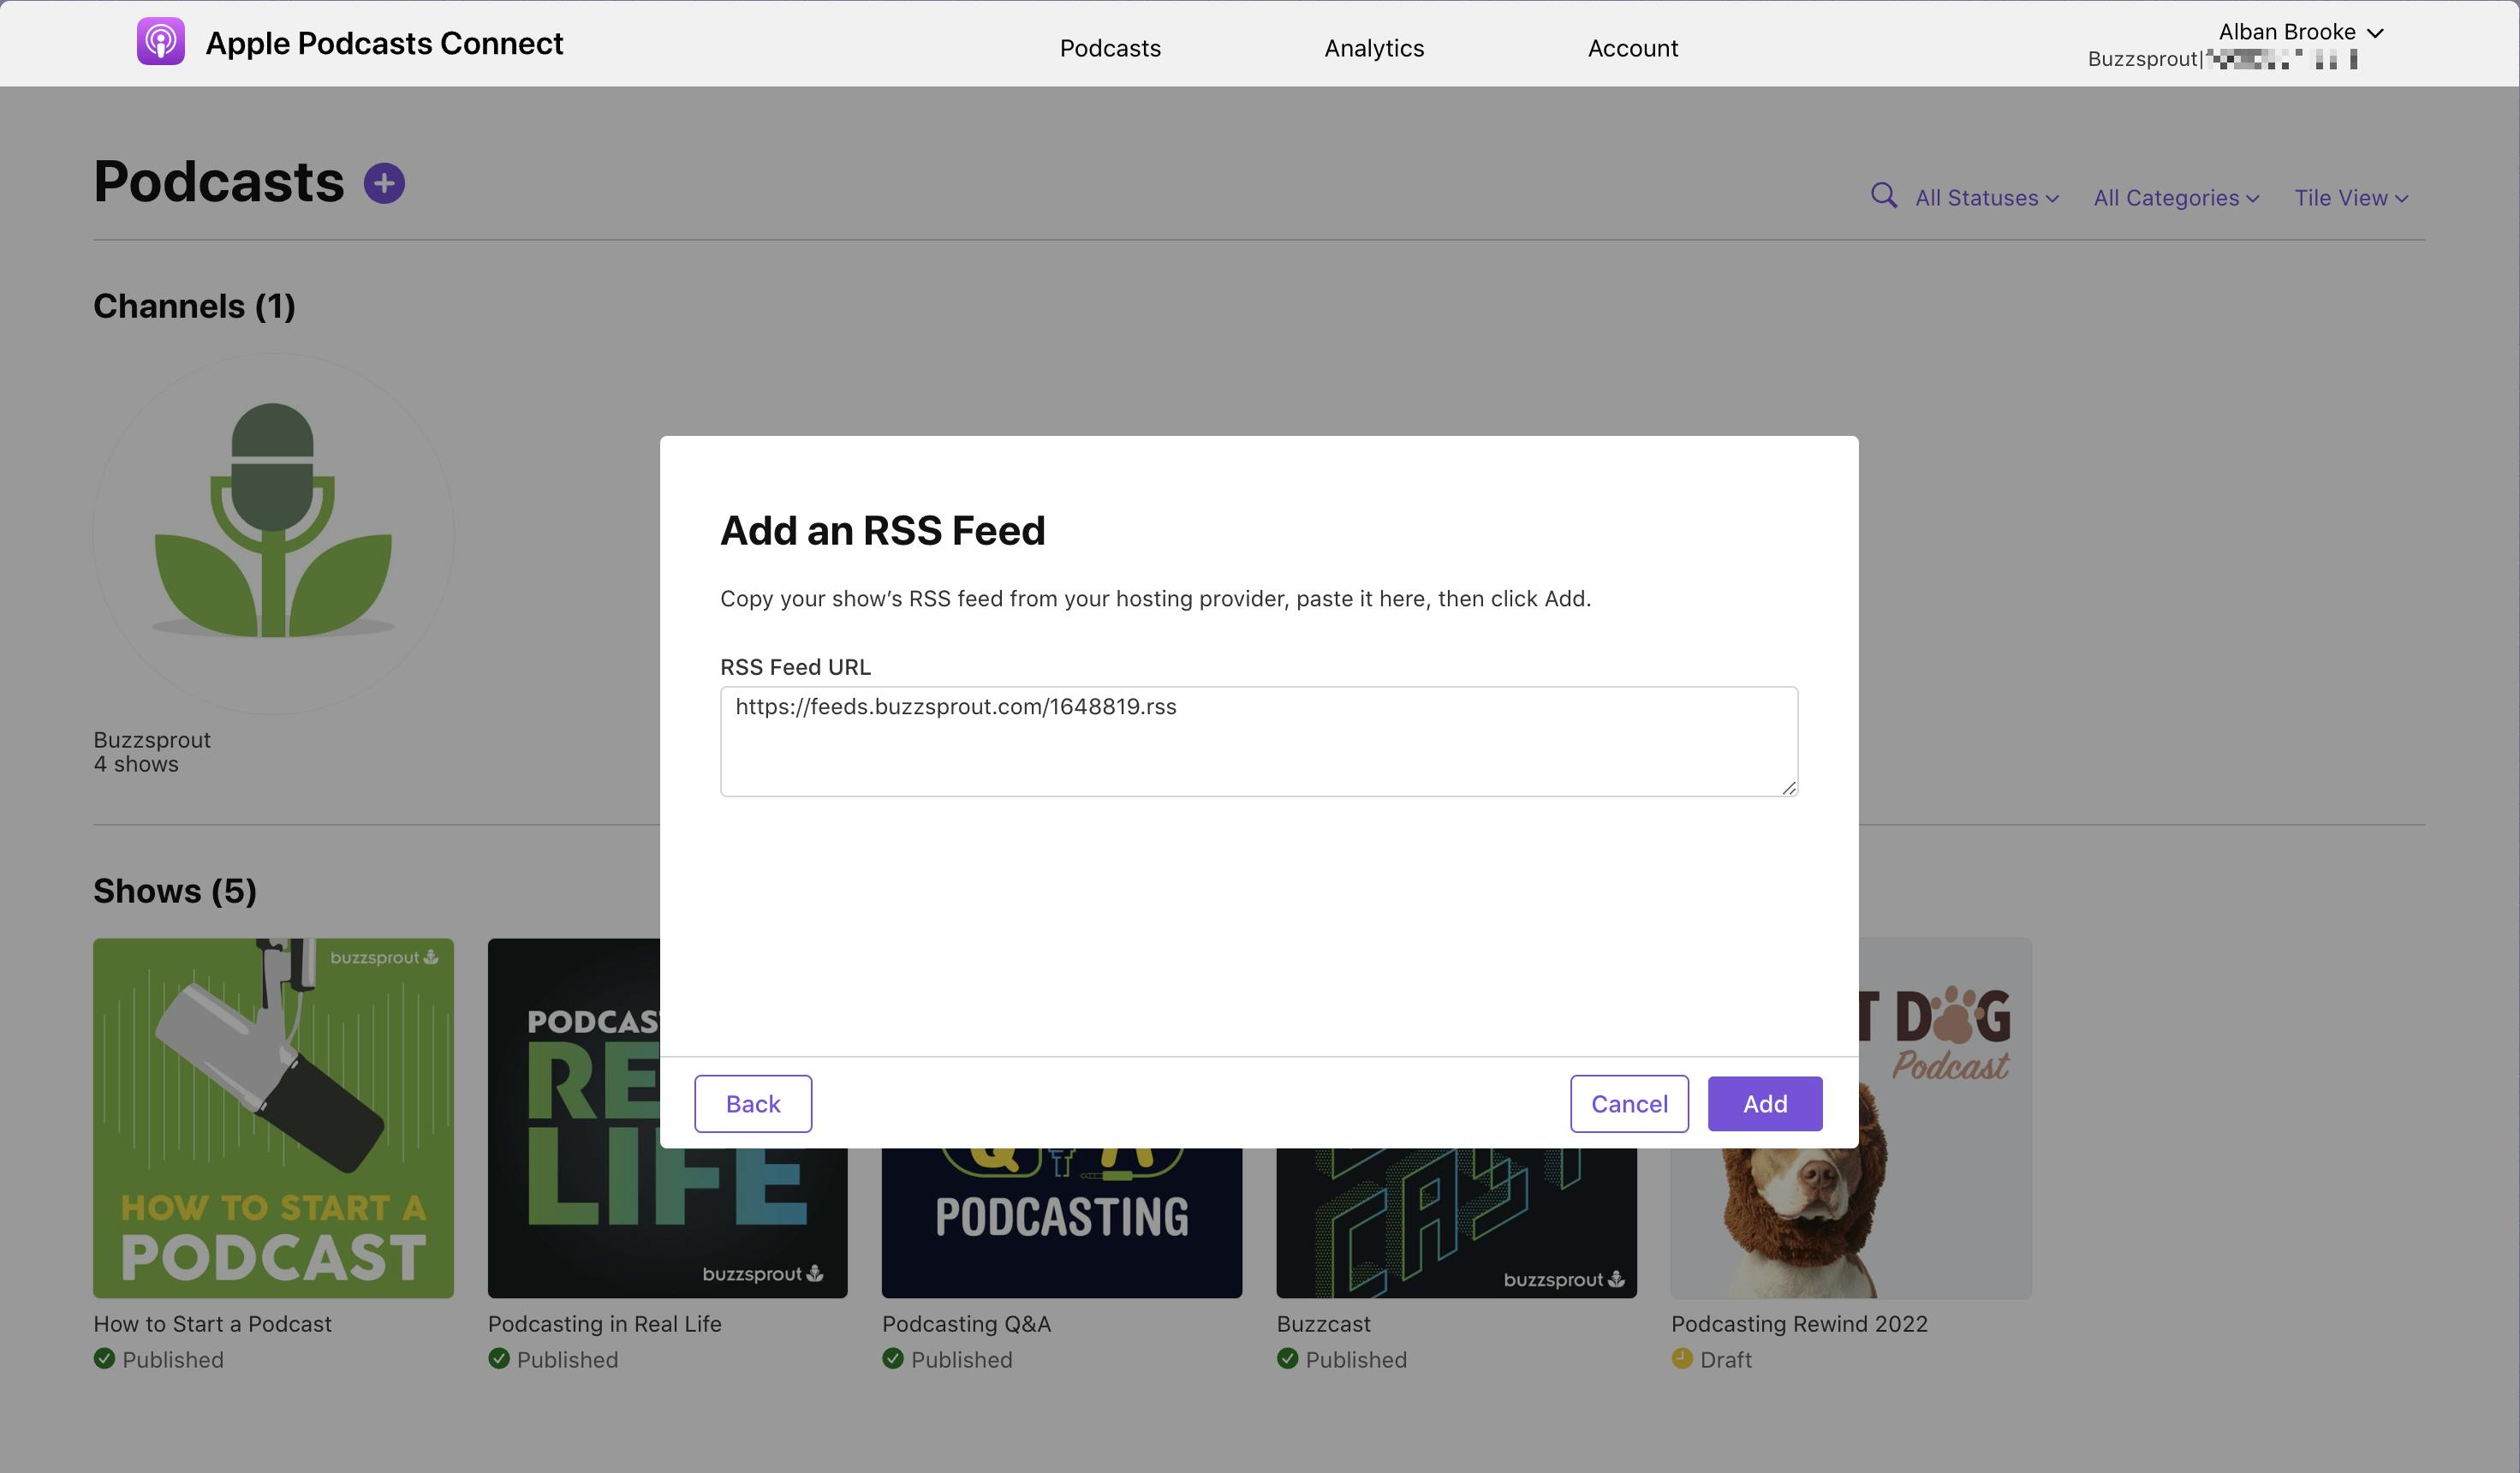 Adding RSS Feed to Apple Podcasts